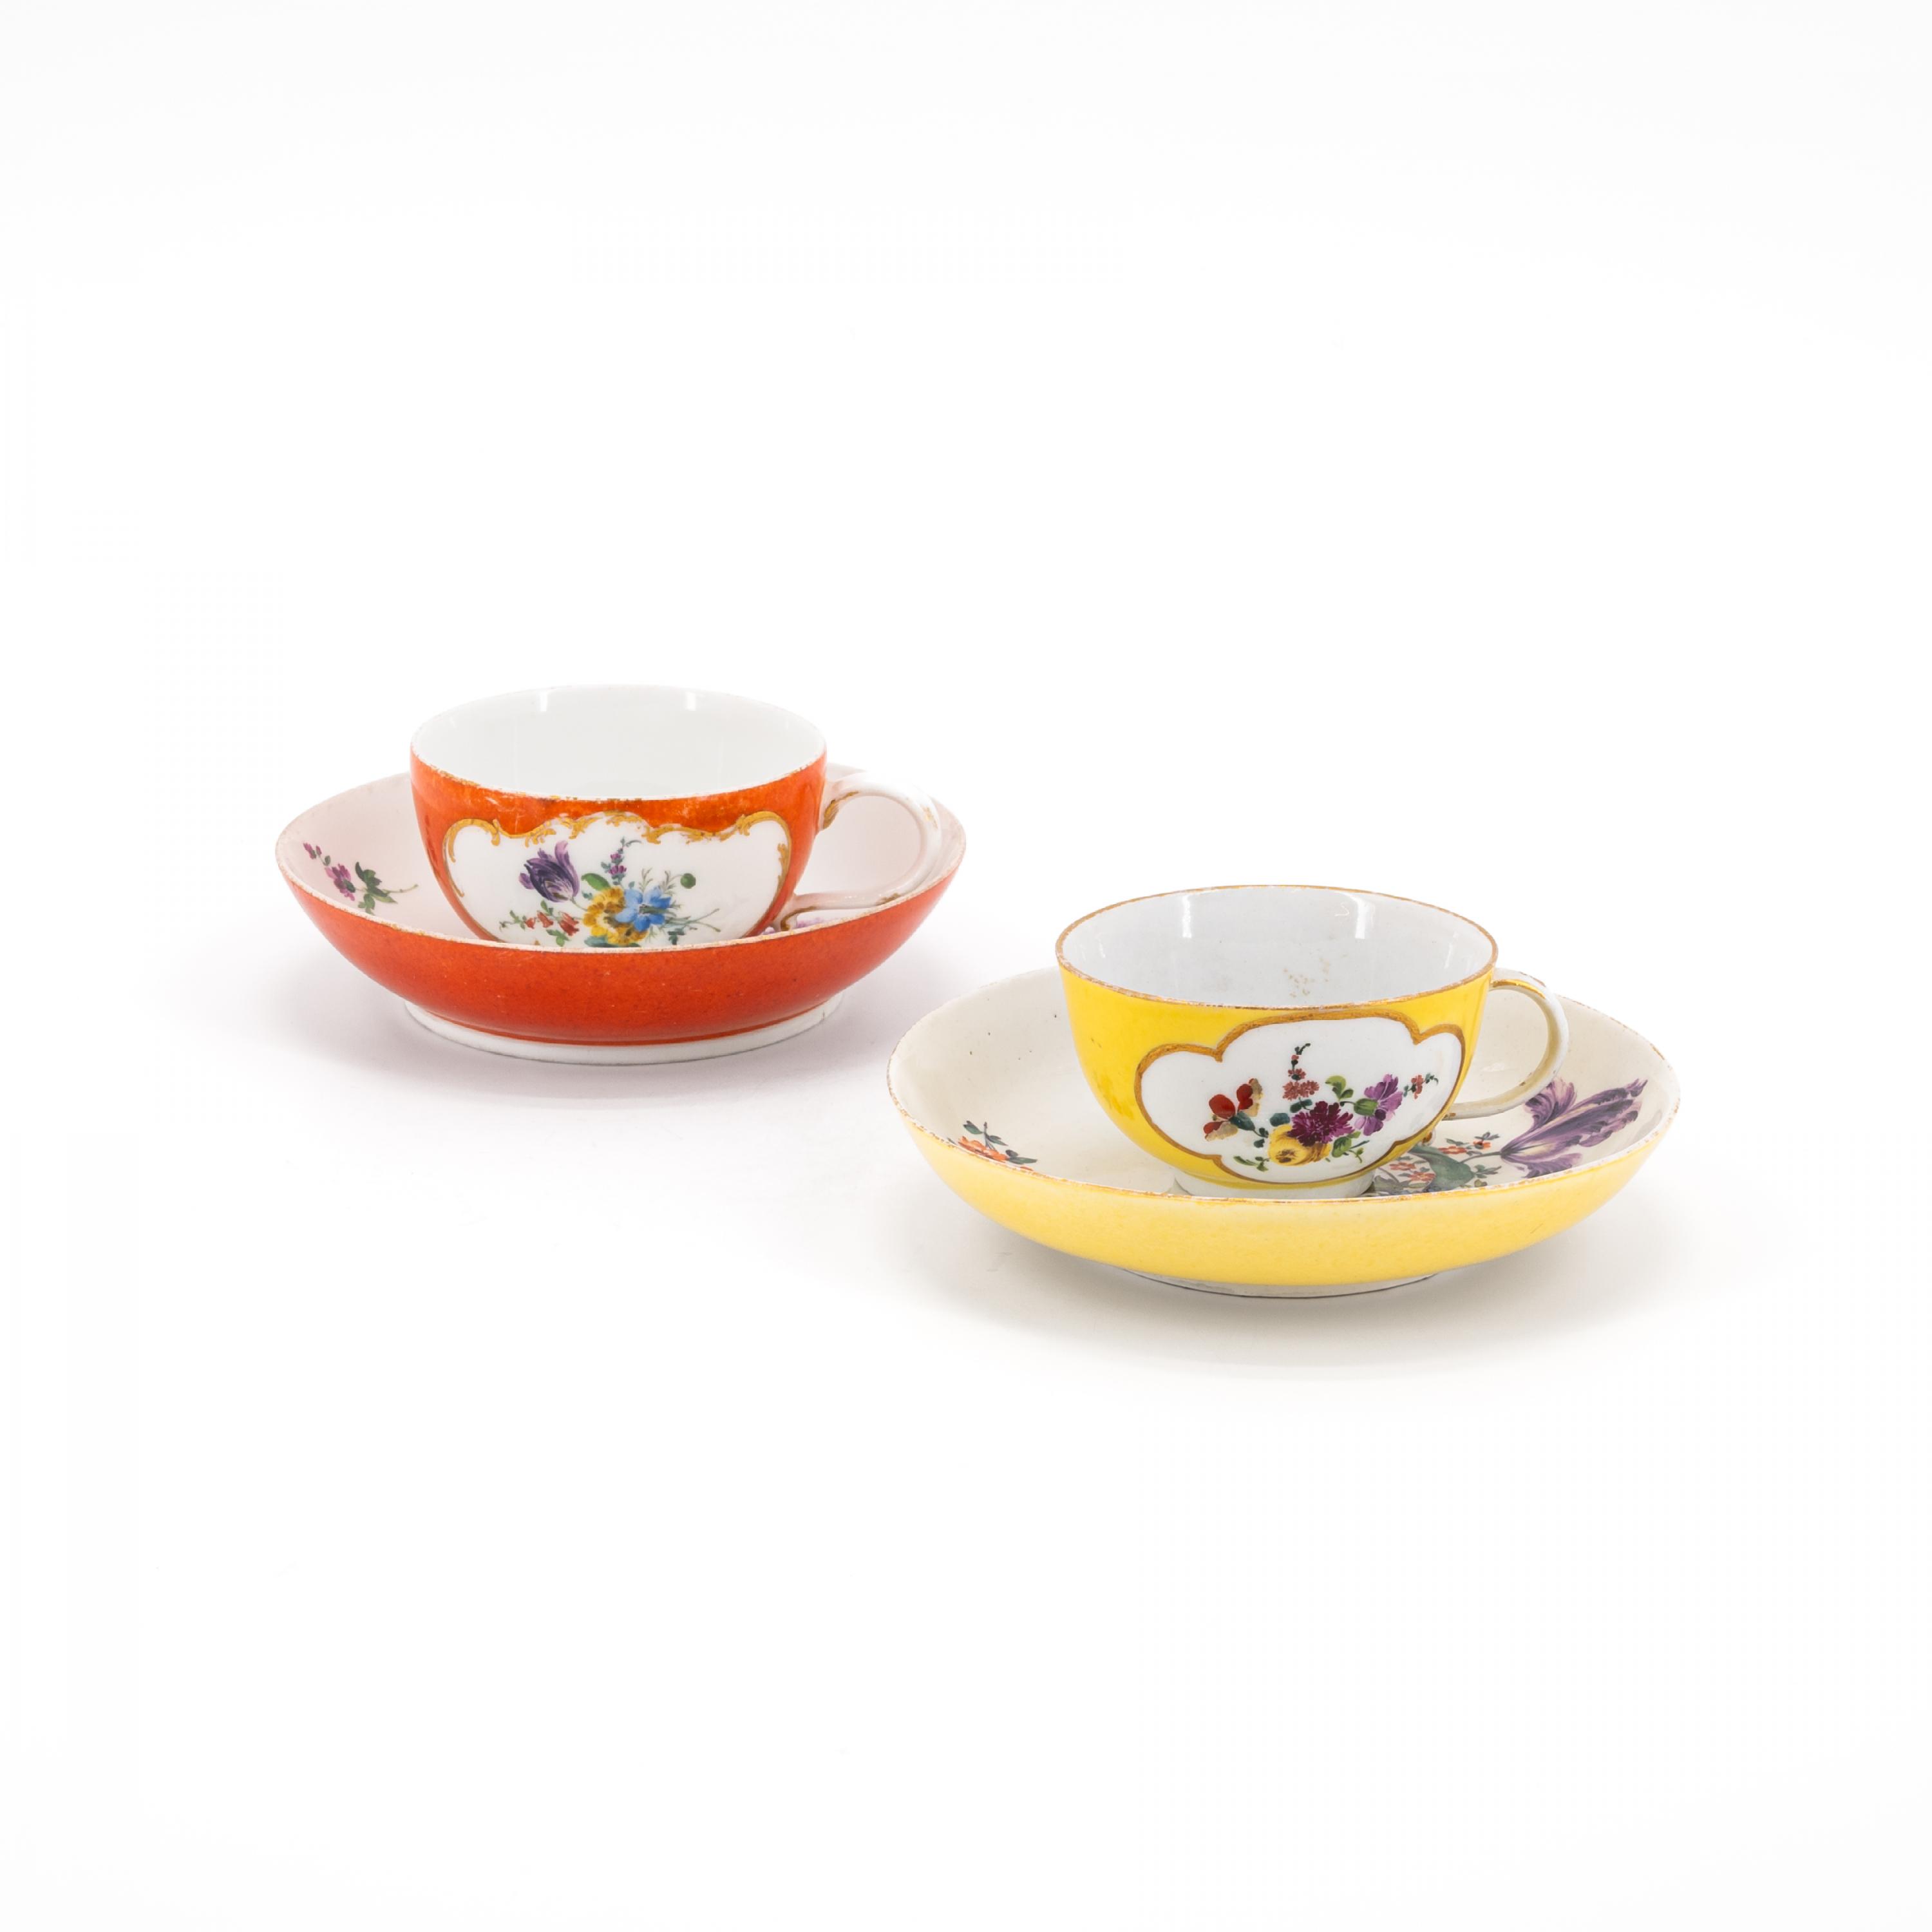 TWO PORCELAIN CUPS AND SAUCERS WITH YELLOW AND ORANGE COLOURED GROUND AS WELL AS FLORAL DECOR